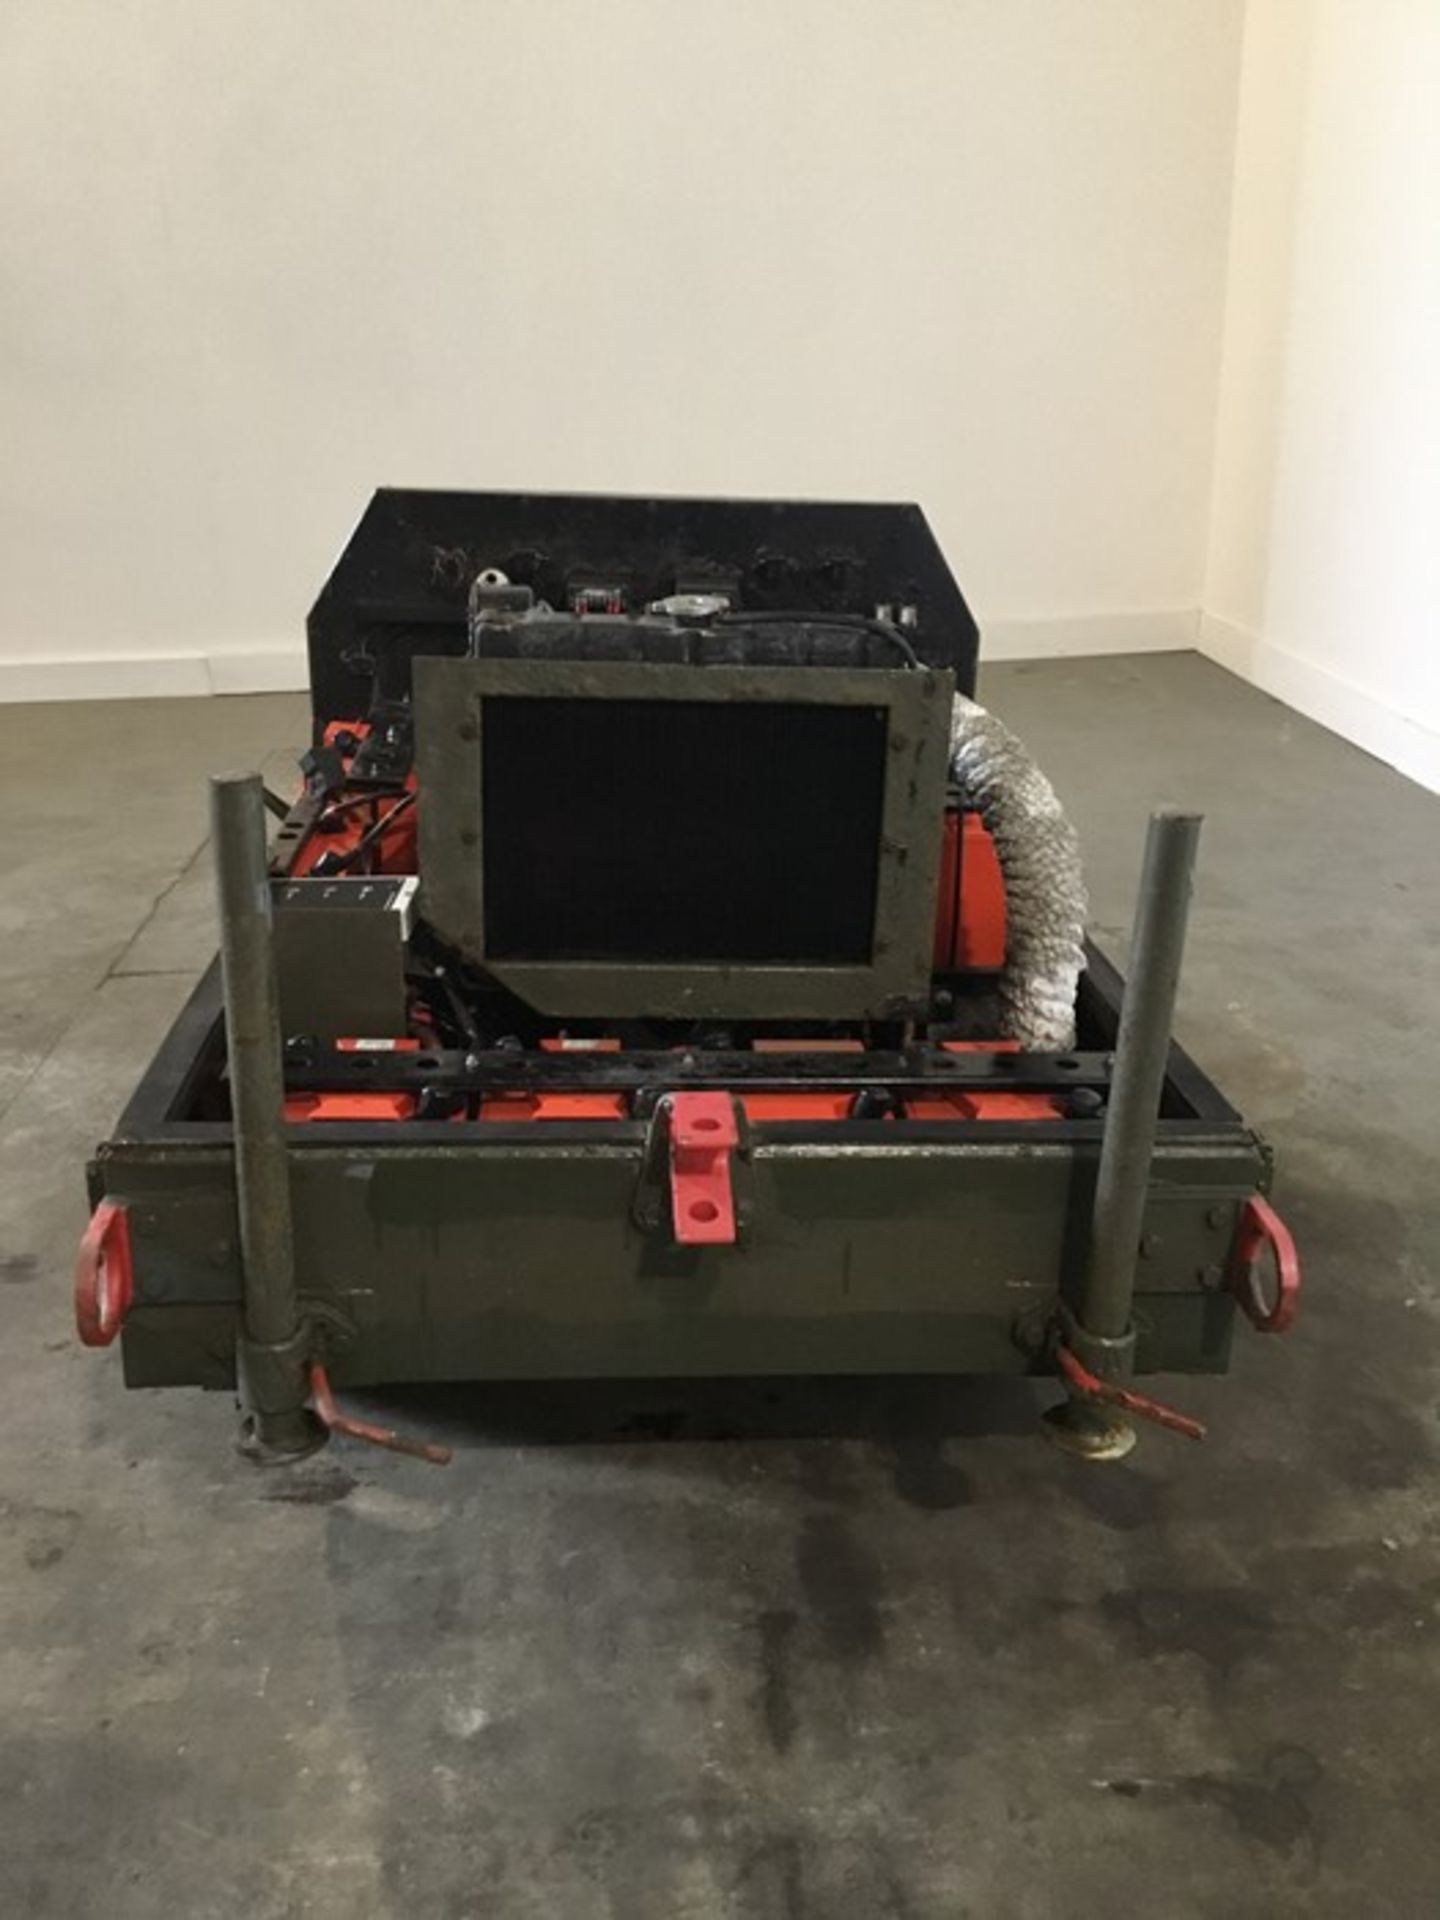 Lister LPW3 Diesel Powerpack, Lister LPW3 3cyl Non Turbo 28.5Hp @ 3600Rpm Power pack In Trolley - Image 24 of 27